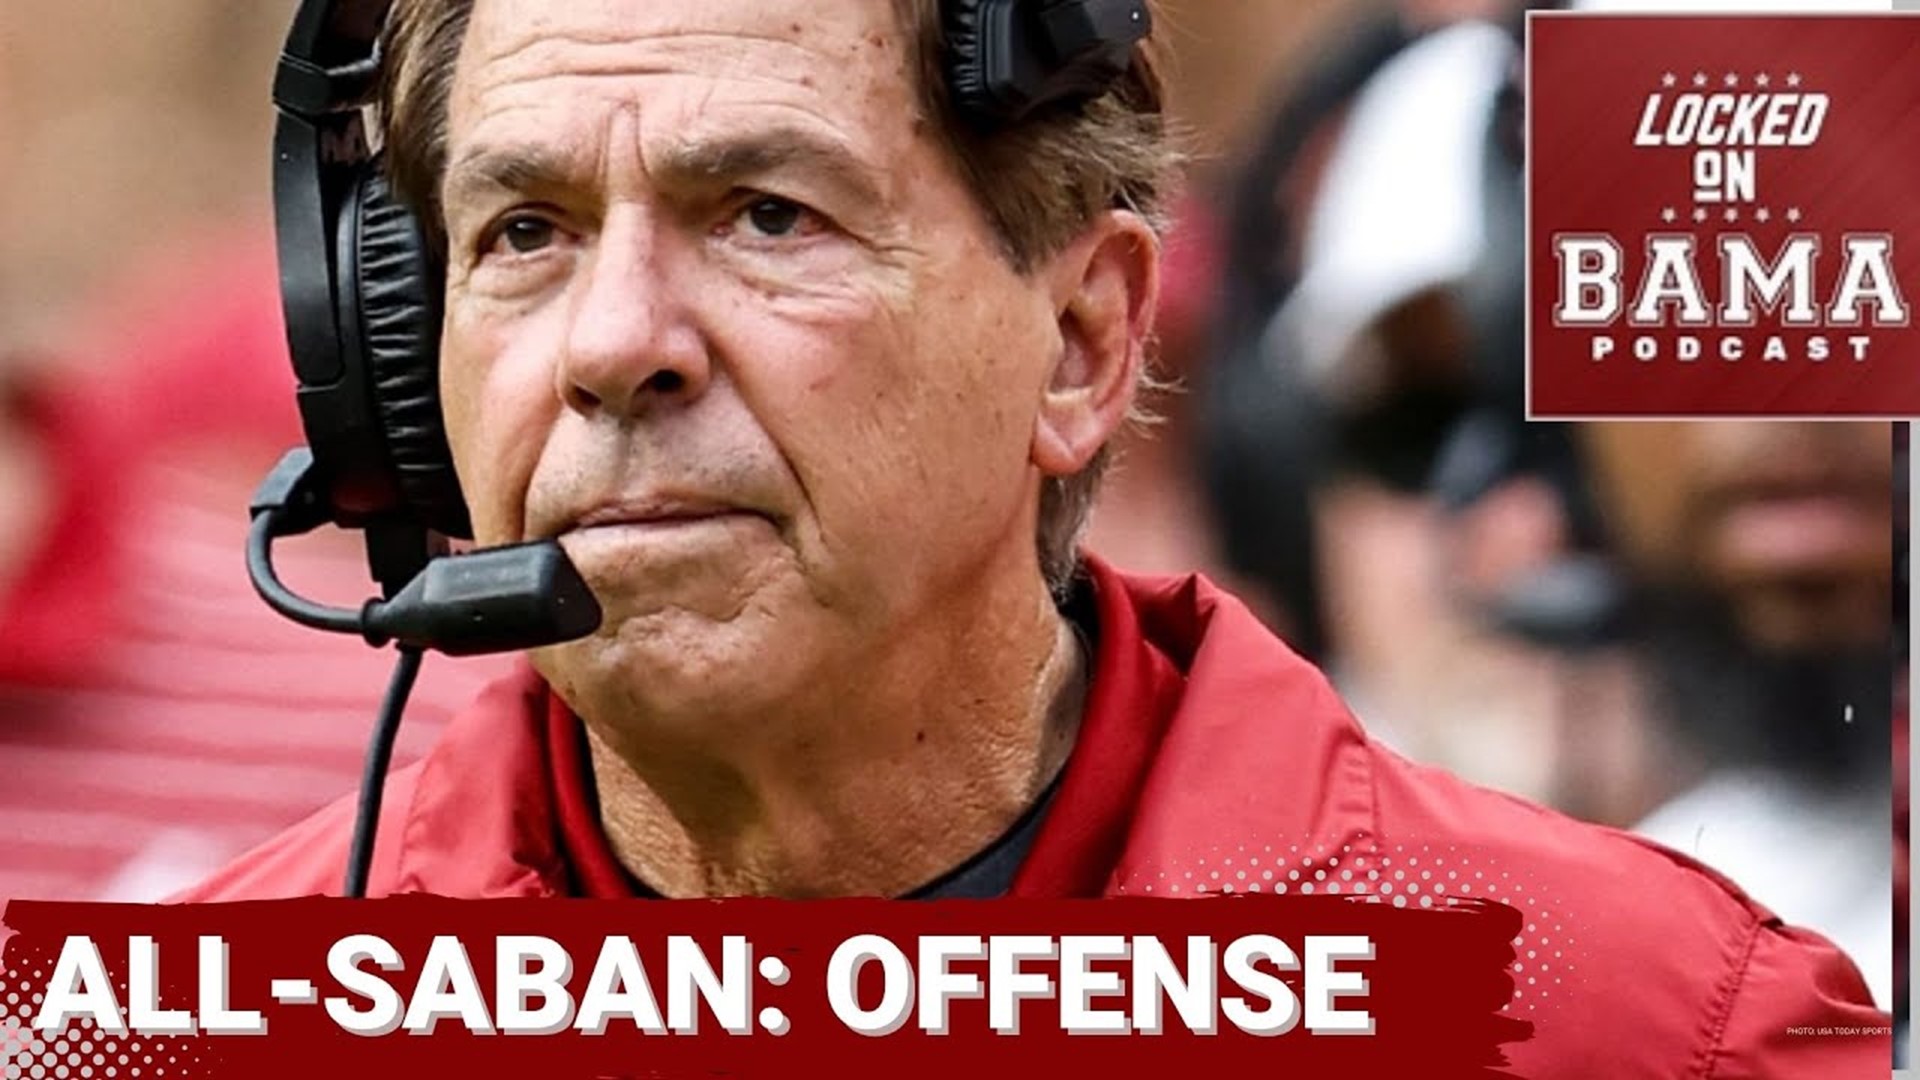 The annual Locked On Bama draft for the All-Saban team at Alabama!